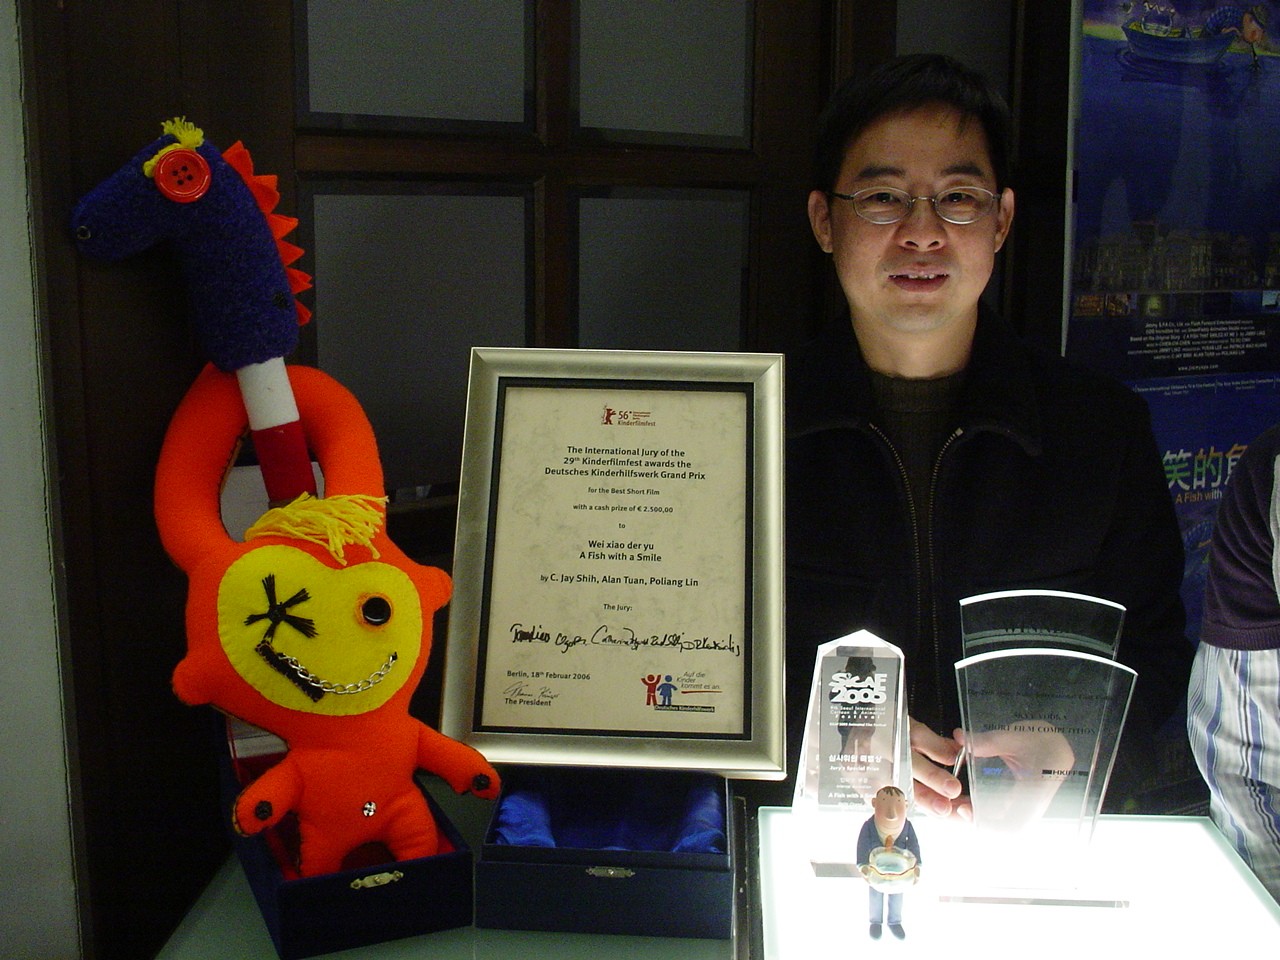 A Fish with a Smile: An International Milestone for Taiwanese Animation